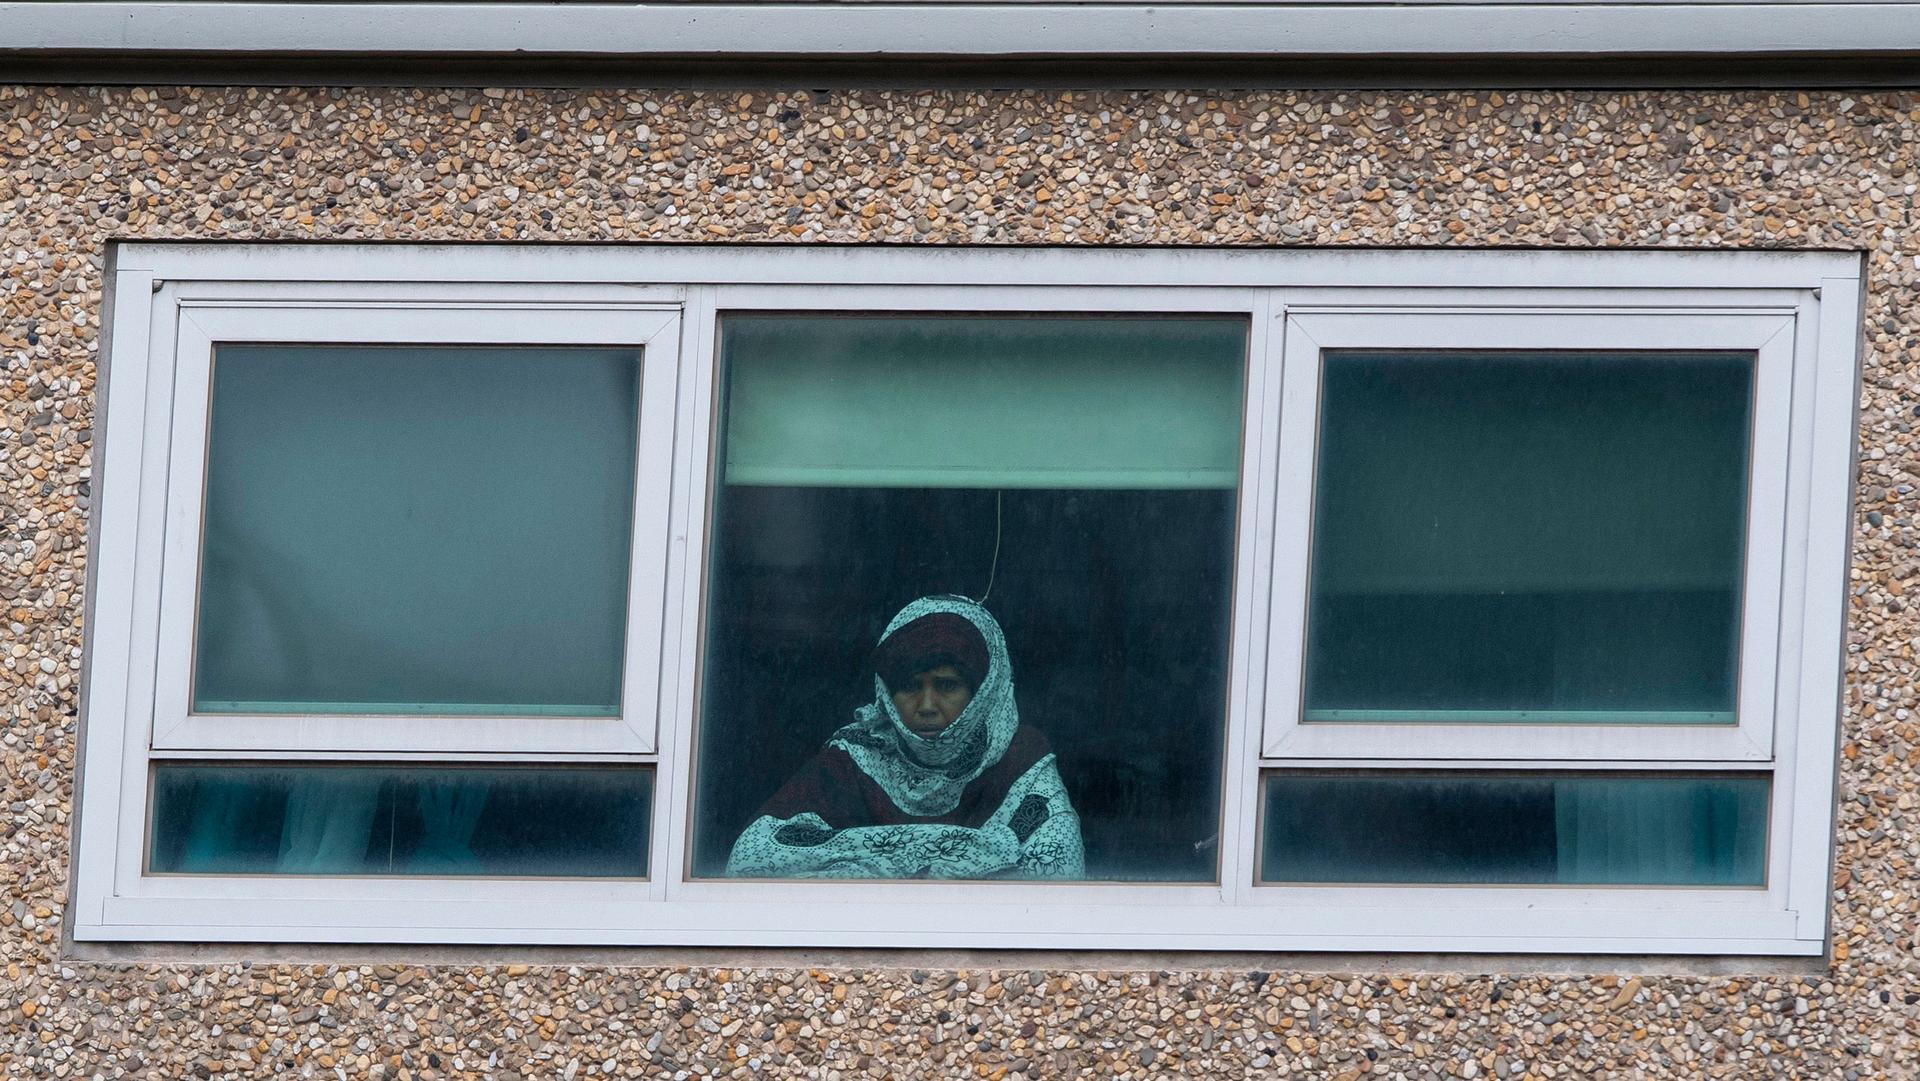 A woman is shown from looking through a window and wearing a shirt with a hood over her head.